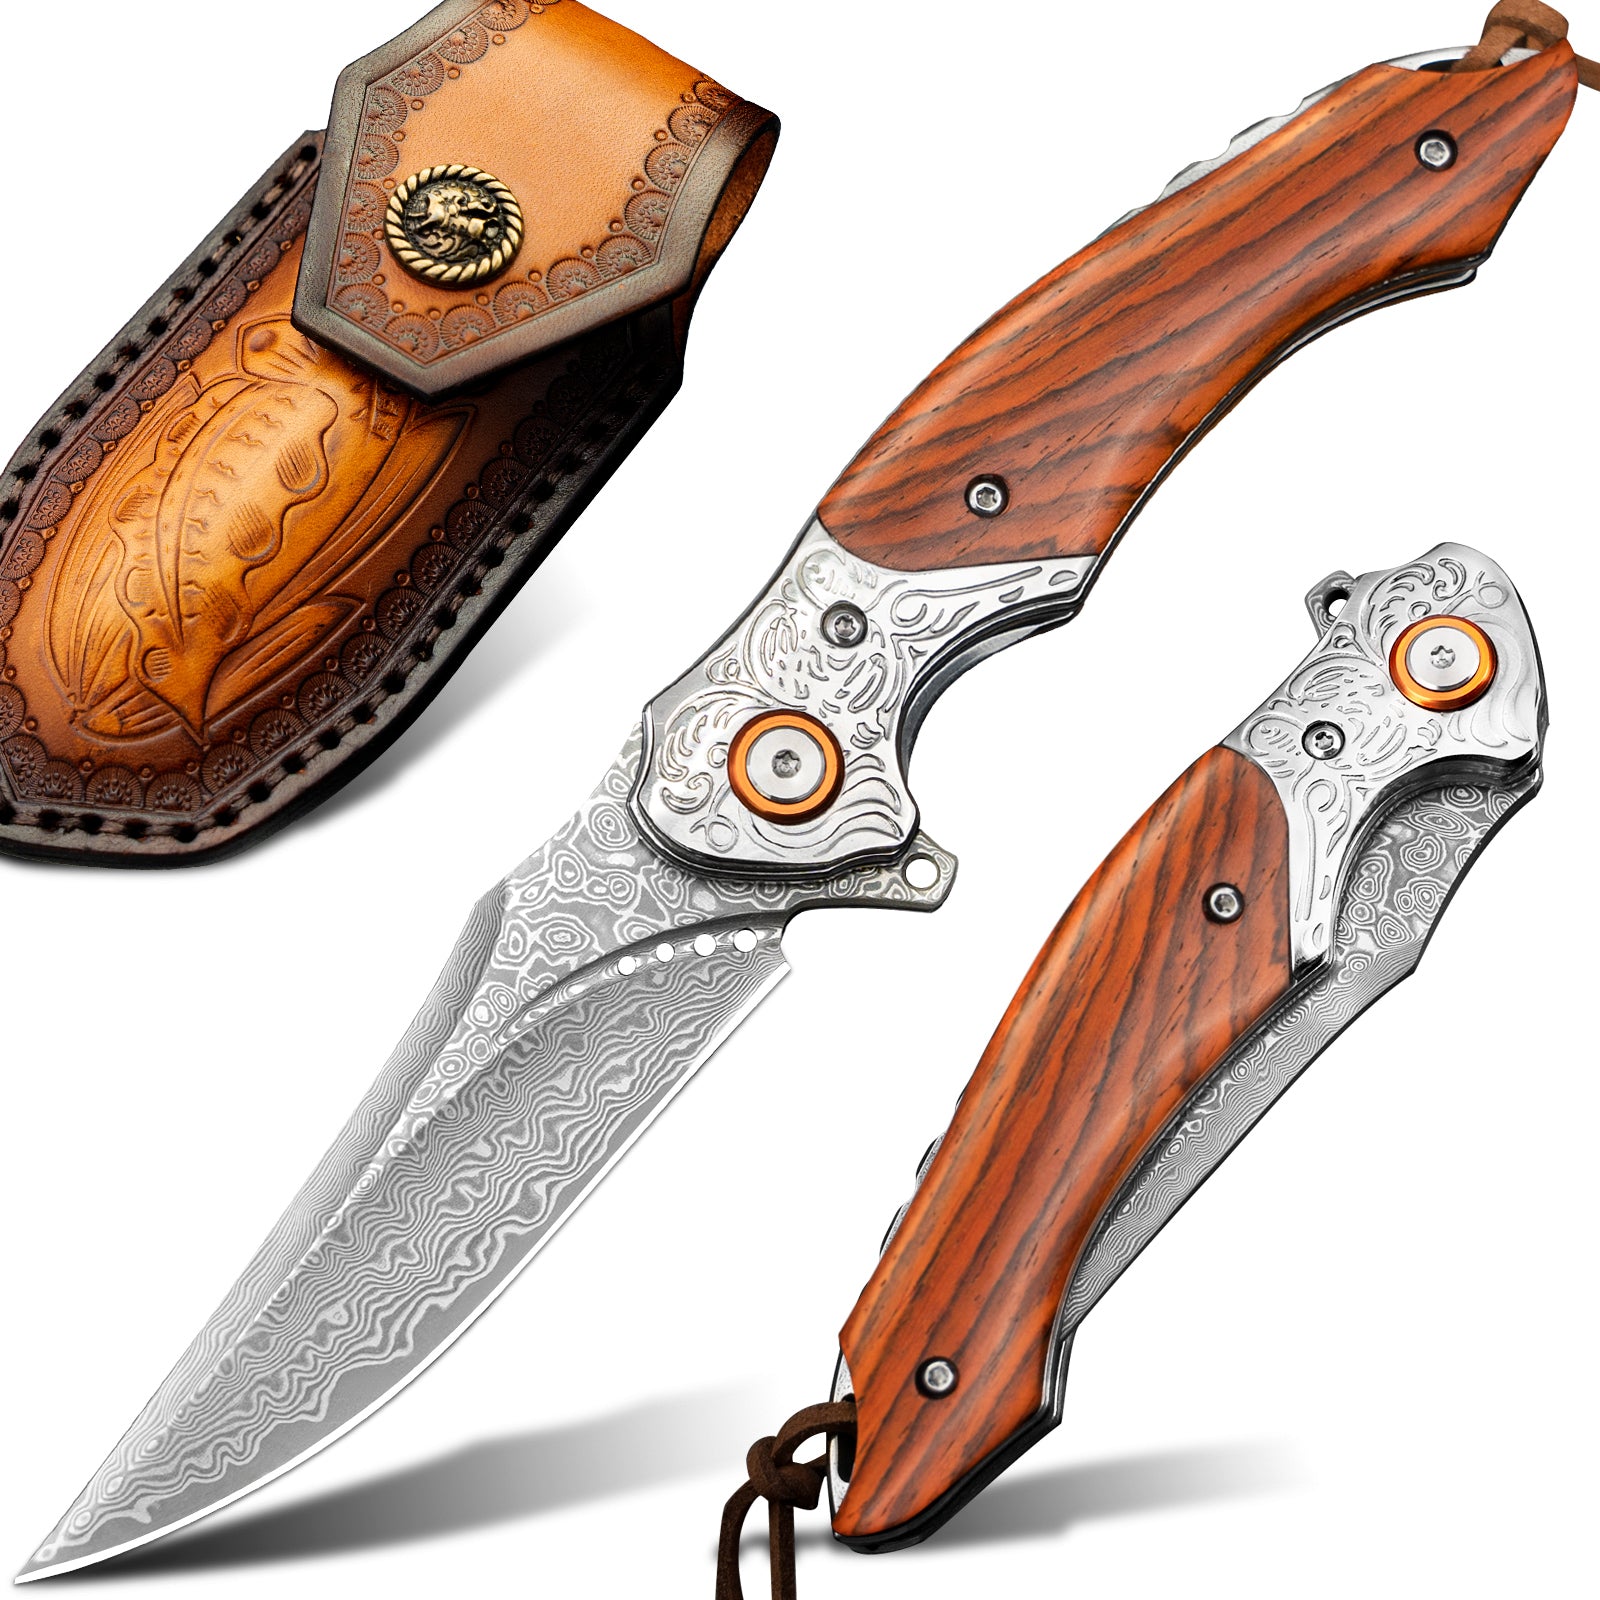 Raffir folding knife kit with damascus knife blade and VG10 core steel